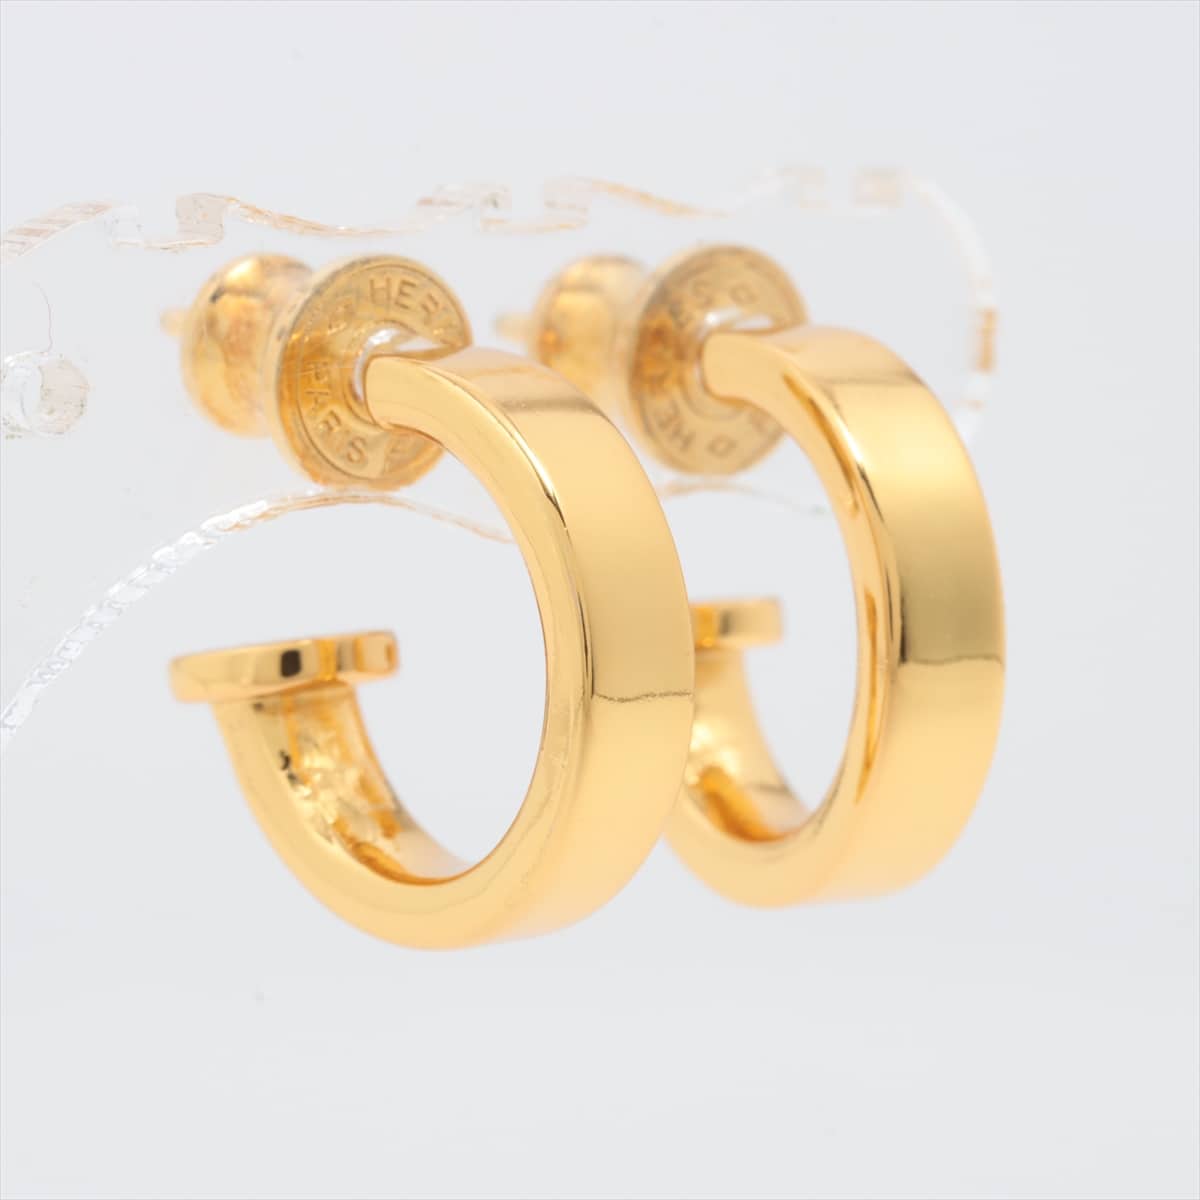 Hermès O'Kelly Piercing jewelry (for both ears) GP Gold